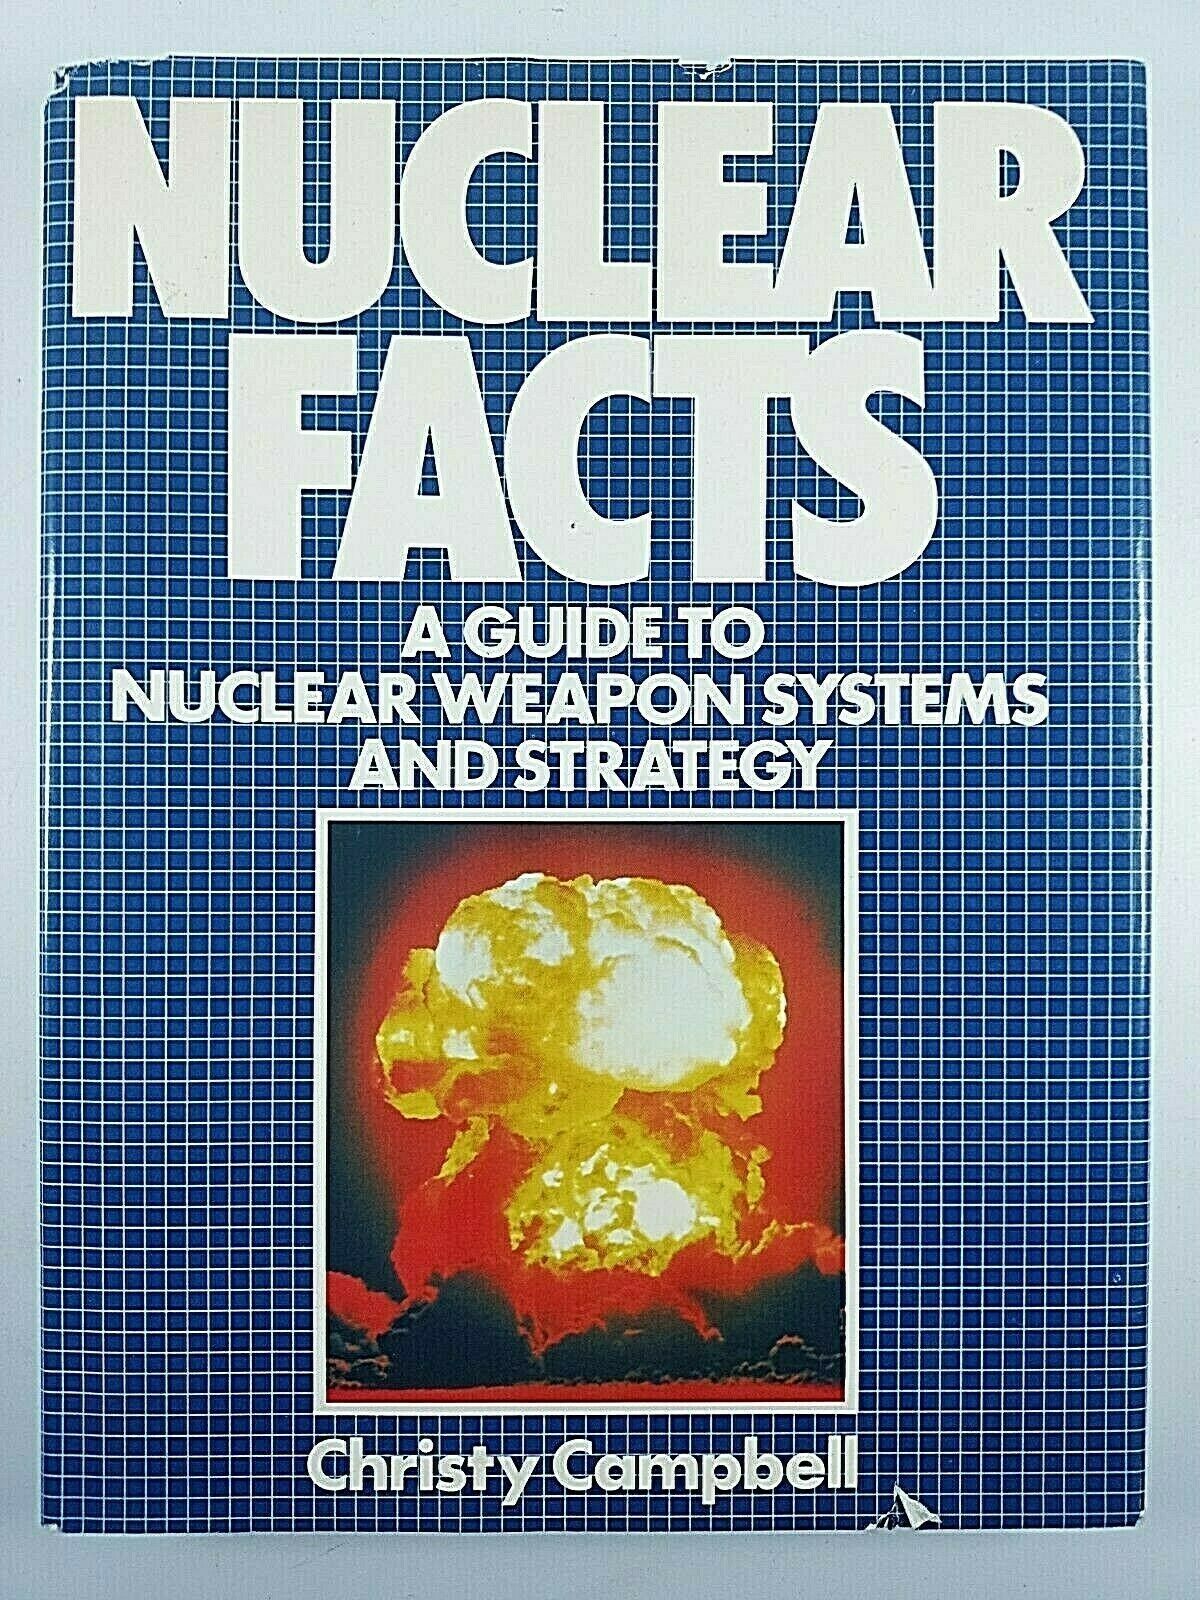 Us Russian Nuclear Facts Guide To Nuclear Weapon Systems Reference Book